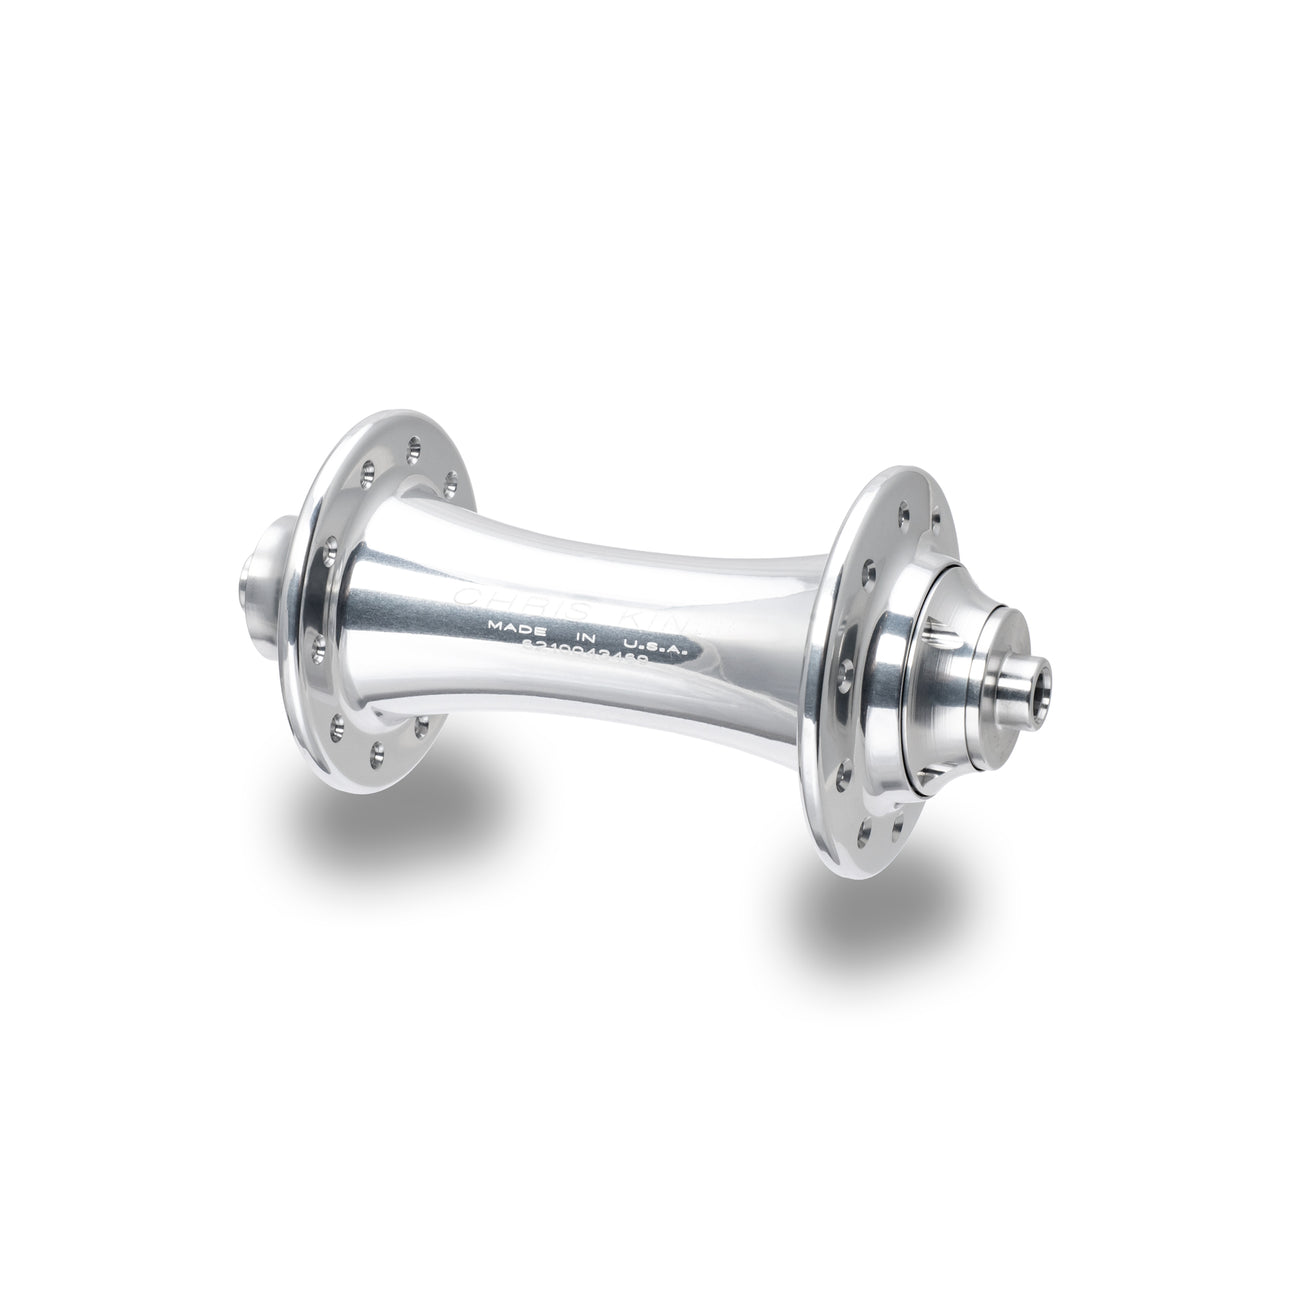 Chris King front qr hub in silver